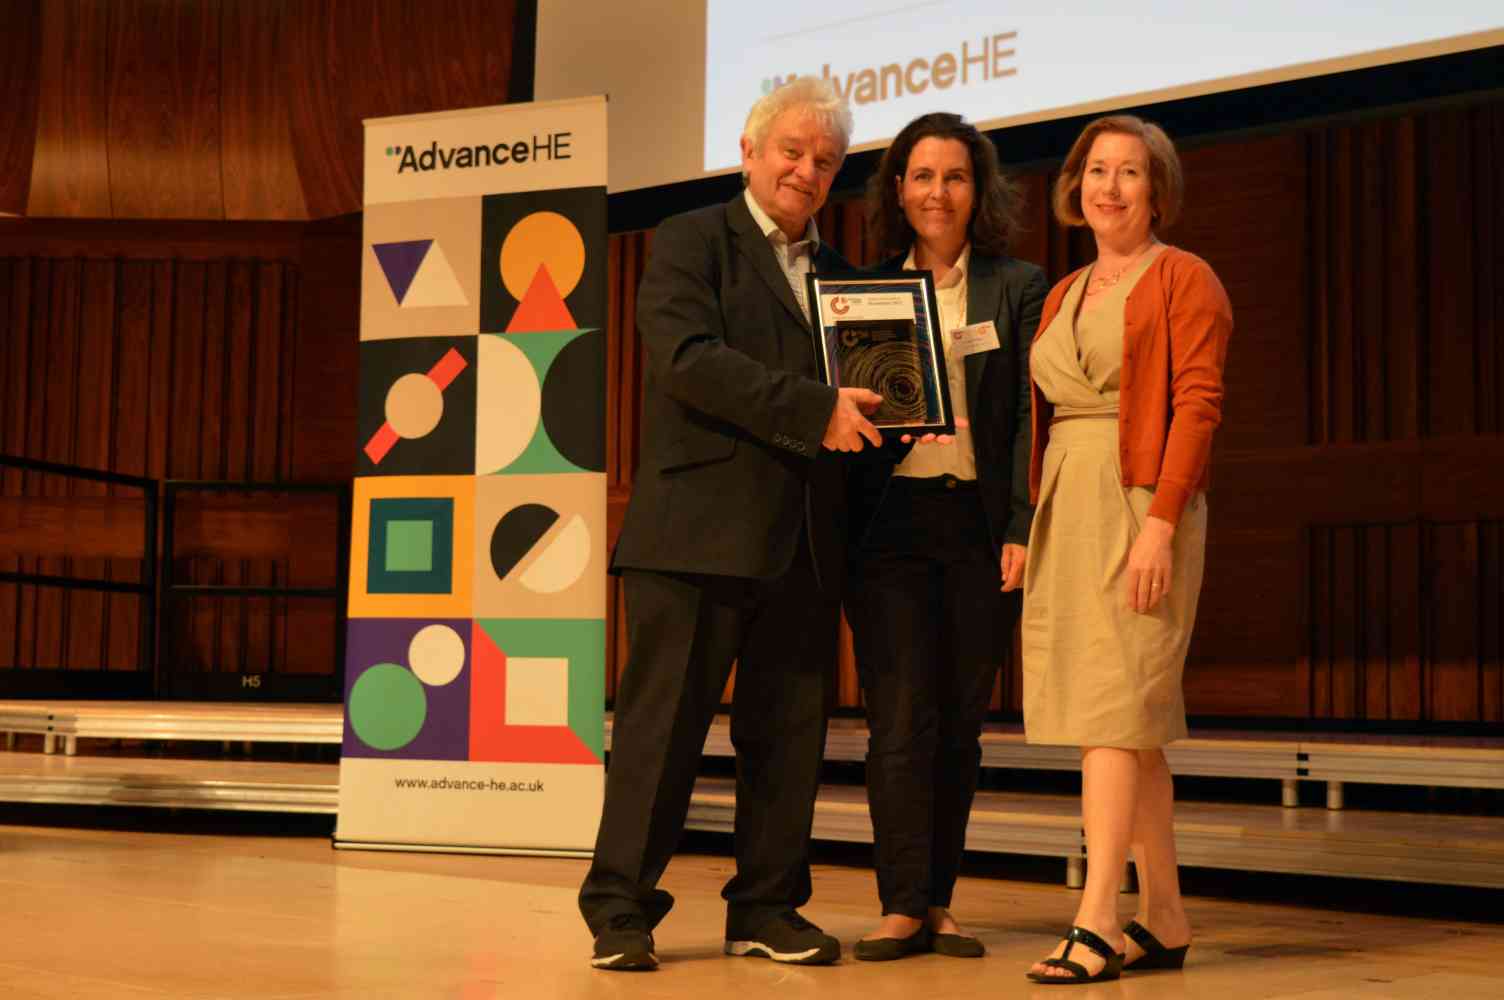 Collecting the Athena SWAN award with Sir Paul Nurse - The Athena SWAN Bronze award for LSPC